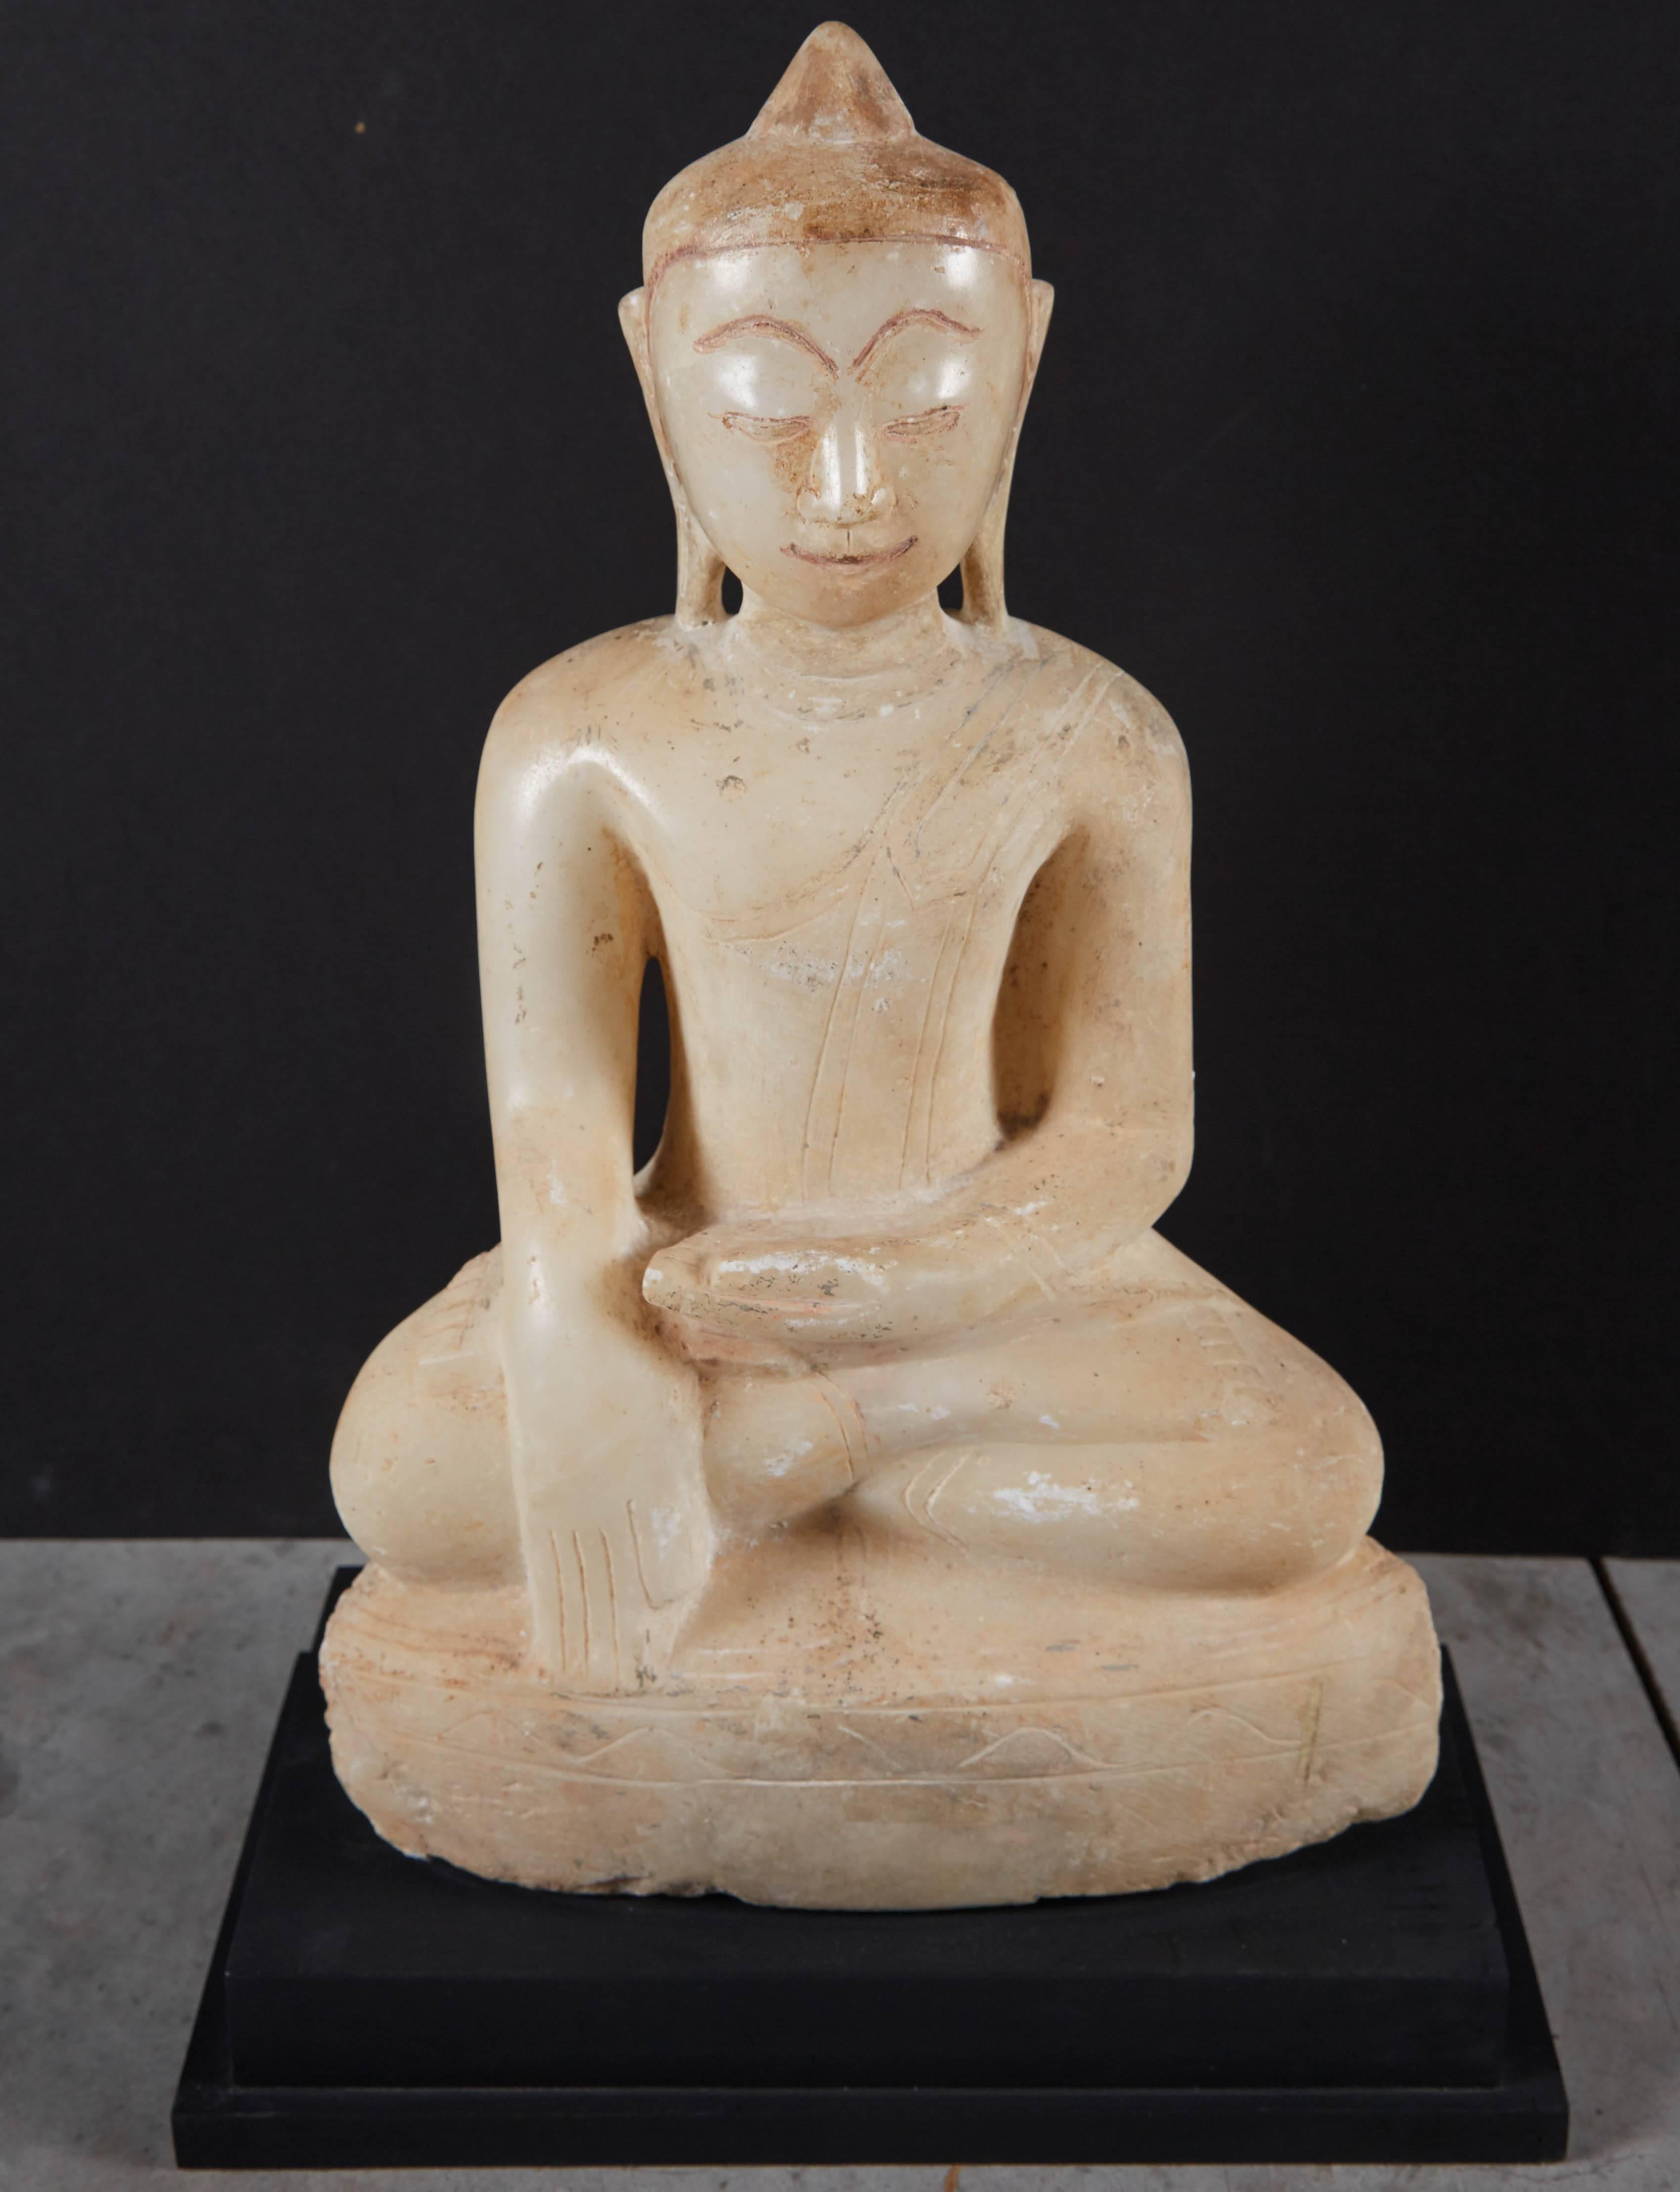 A beautifully carved Burmese Shan style alabaster Buddha with the sweetest smile and a calming, spiritual presence. This early 19th piece is in the Bhumisparsa mudra position (“calling the earth to witness”) and mounted on a custom base.